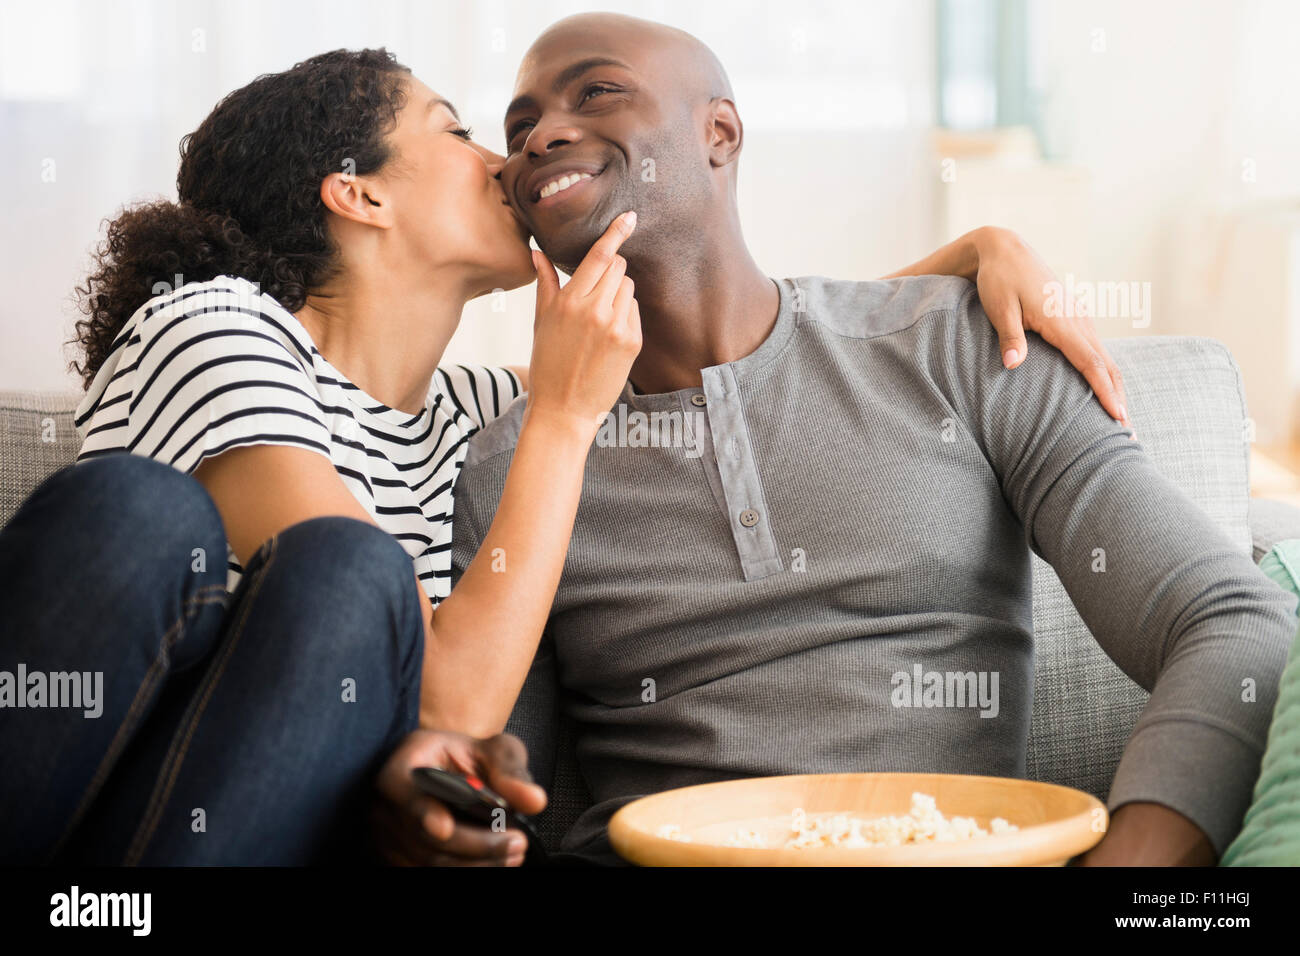 Smiling couple watching television on sofa Banque D'Images